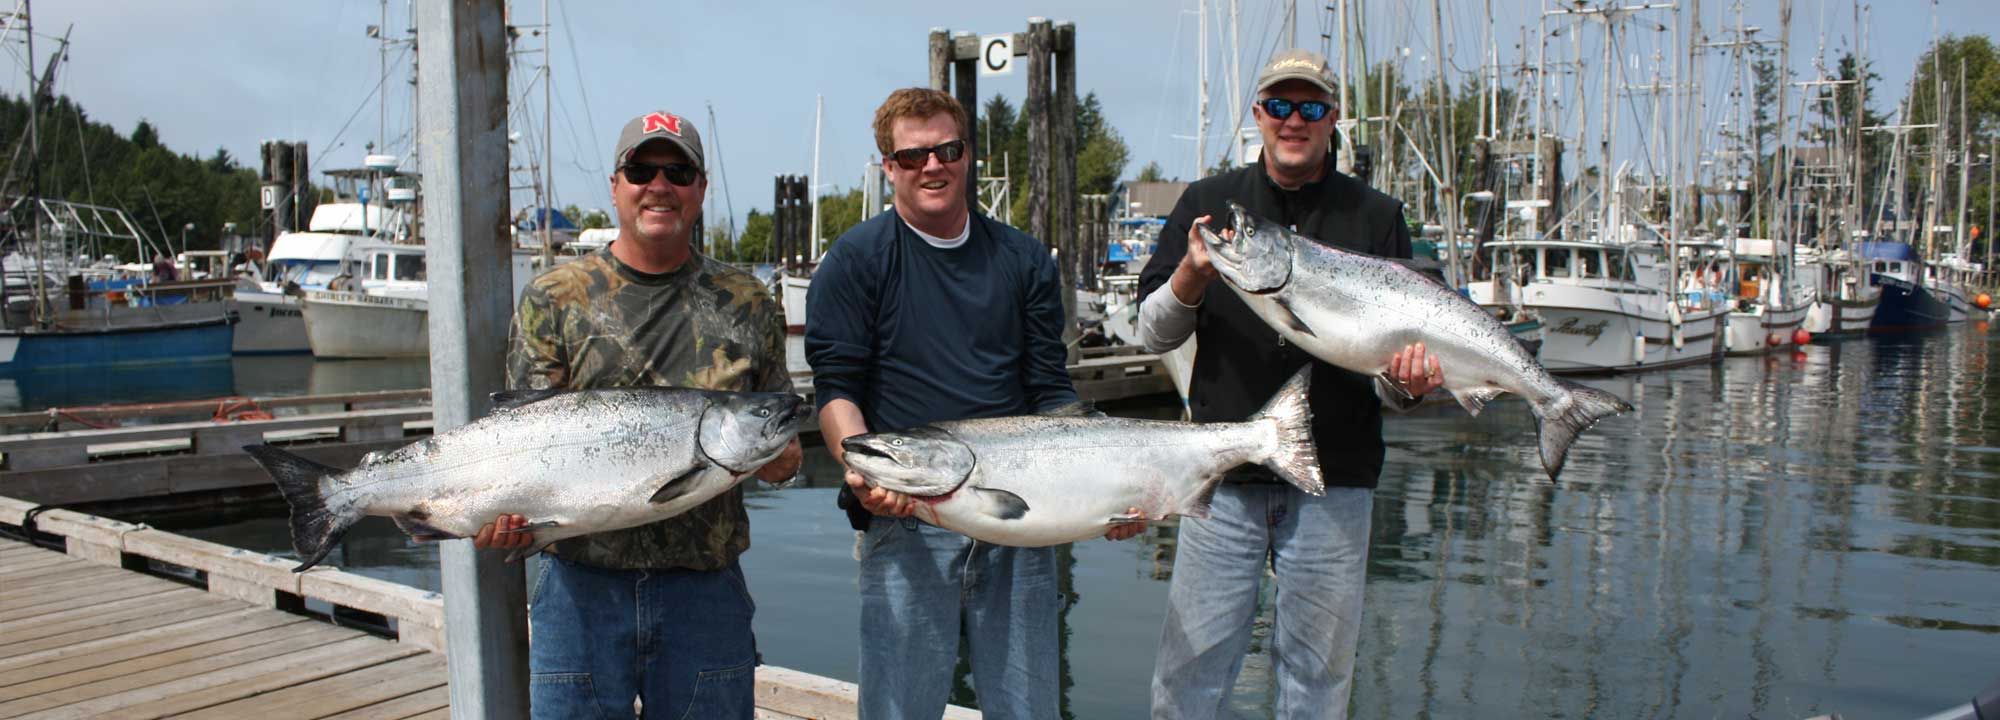 Salmon Eye Charters - Fishing With Flasher And Hootchie Part 1